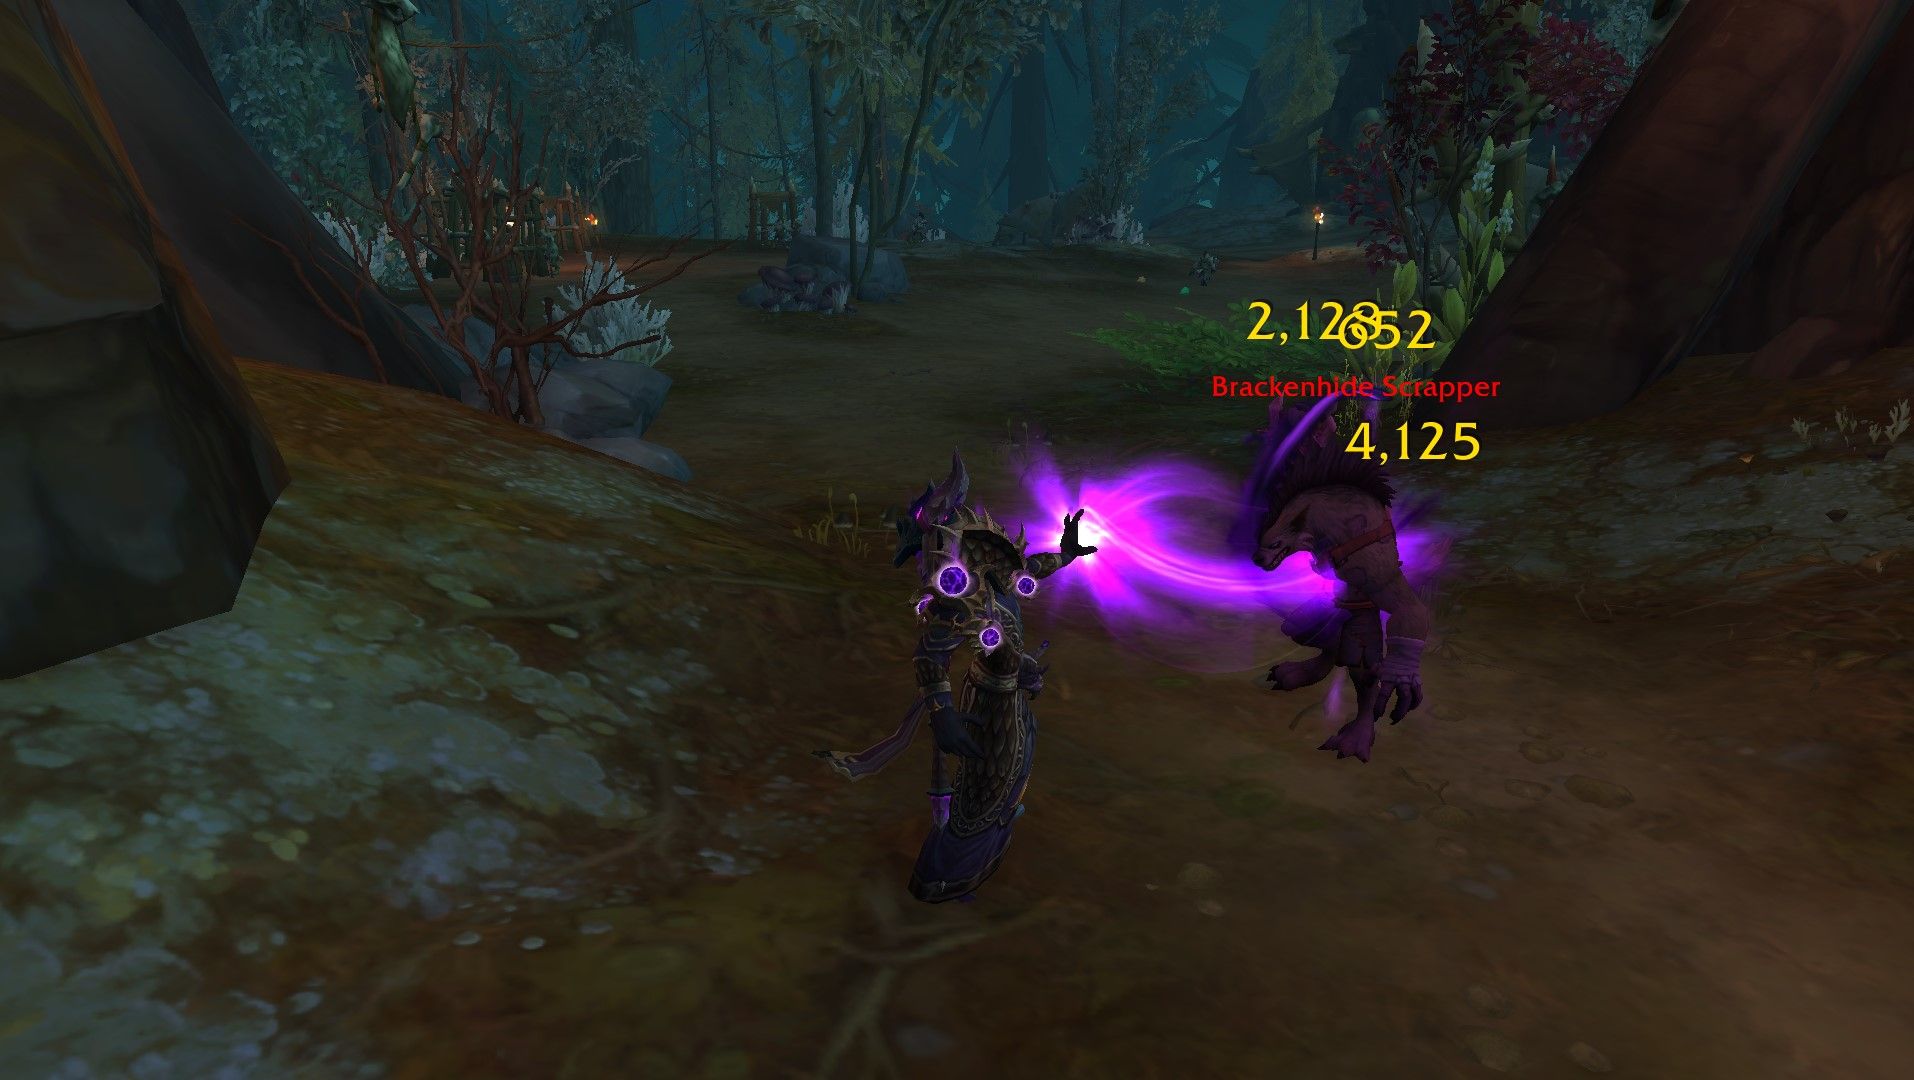 An Affliction Warlock leveling through the main questline of The Azure Span in World of Warcraft.